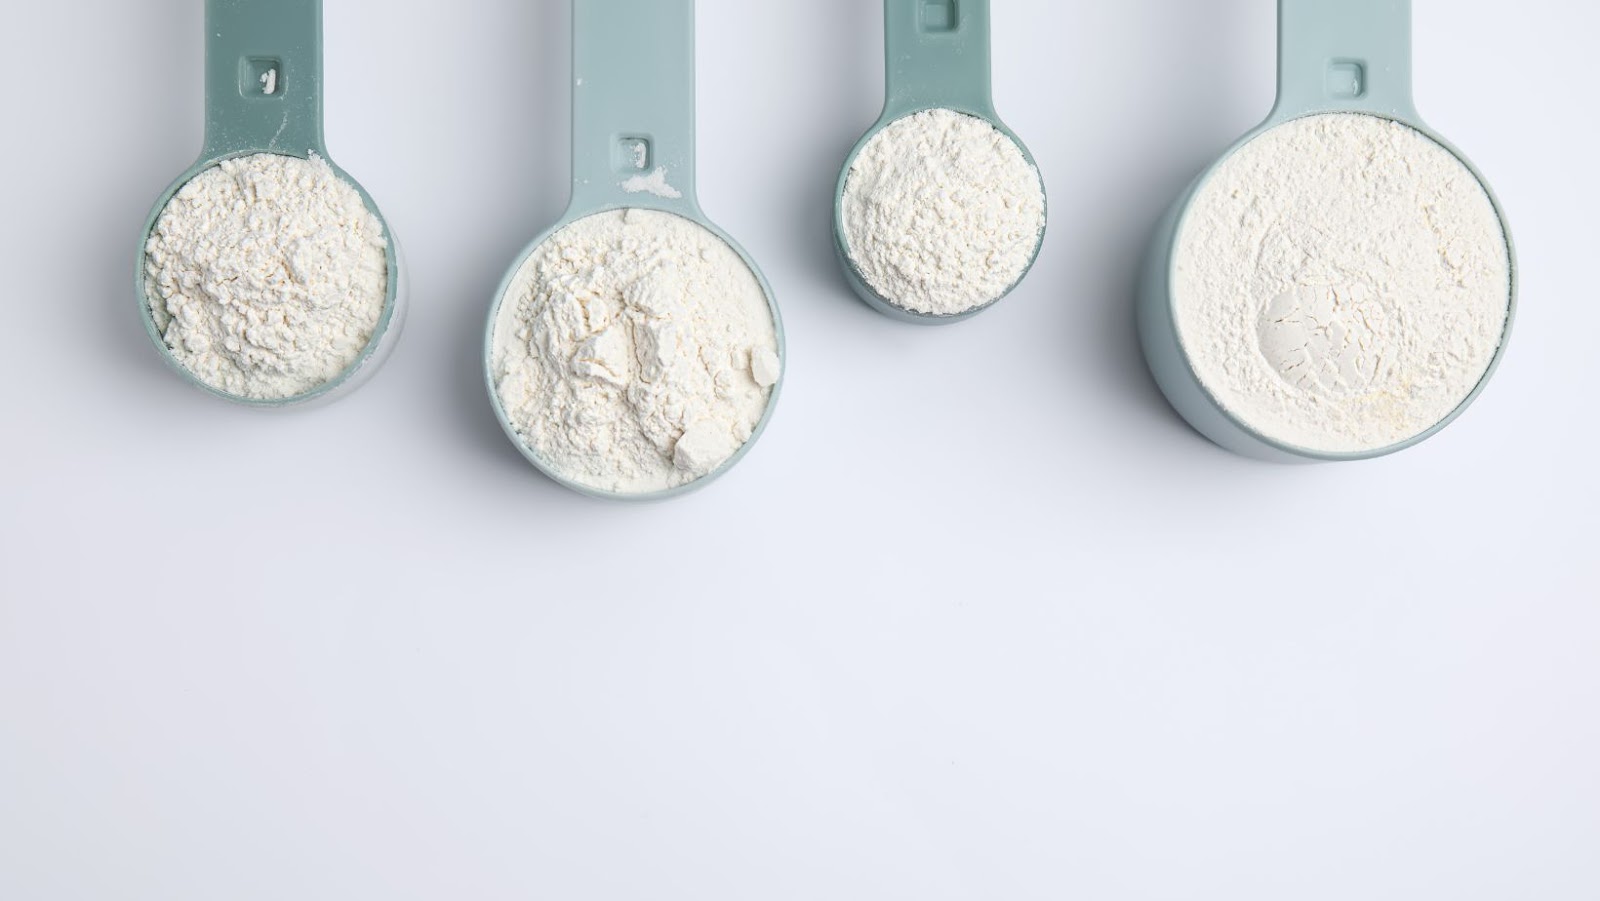 A close-up of 4 scoops of creatine powder